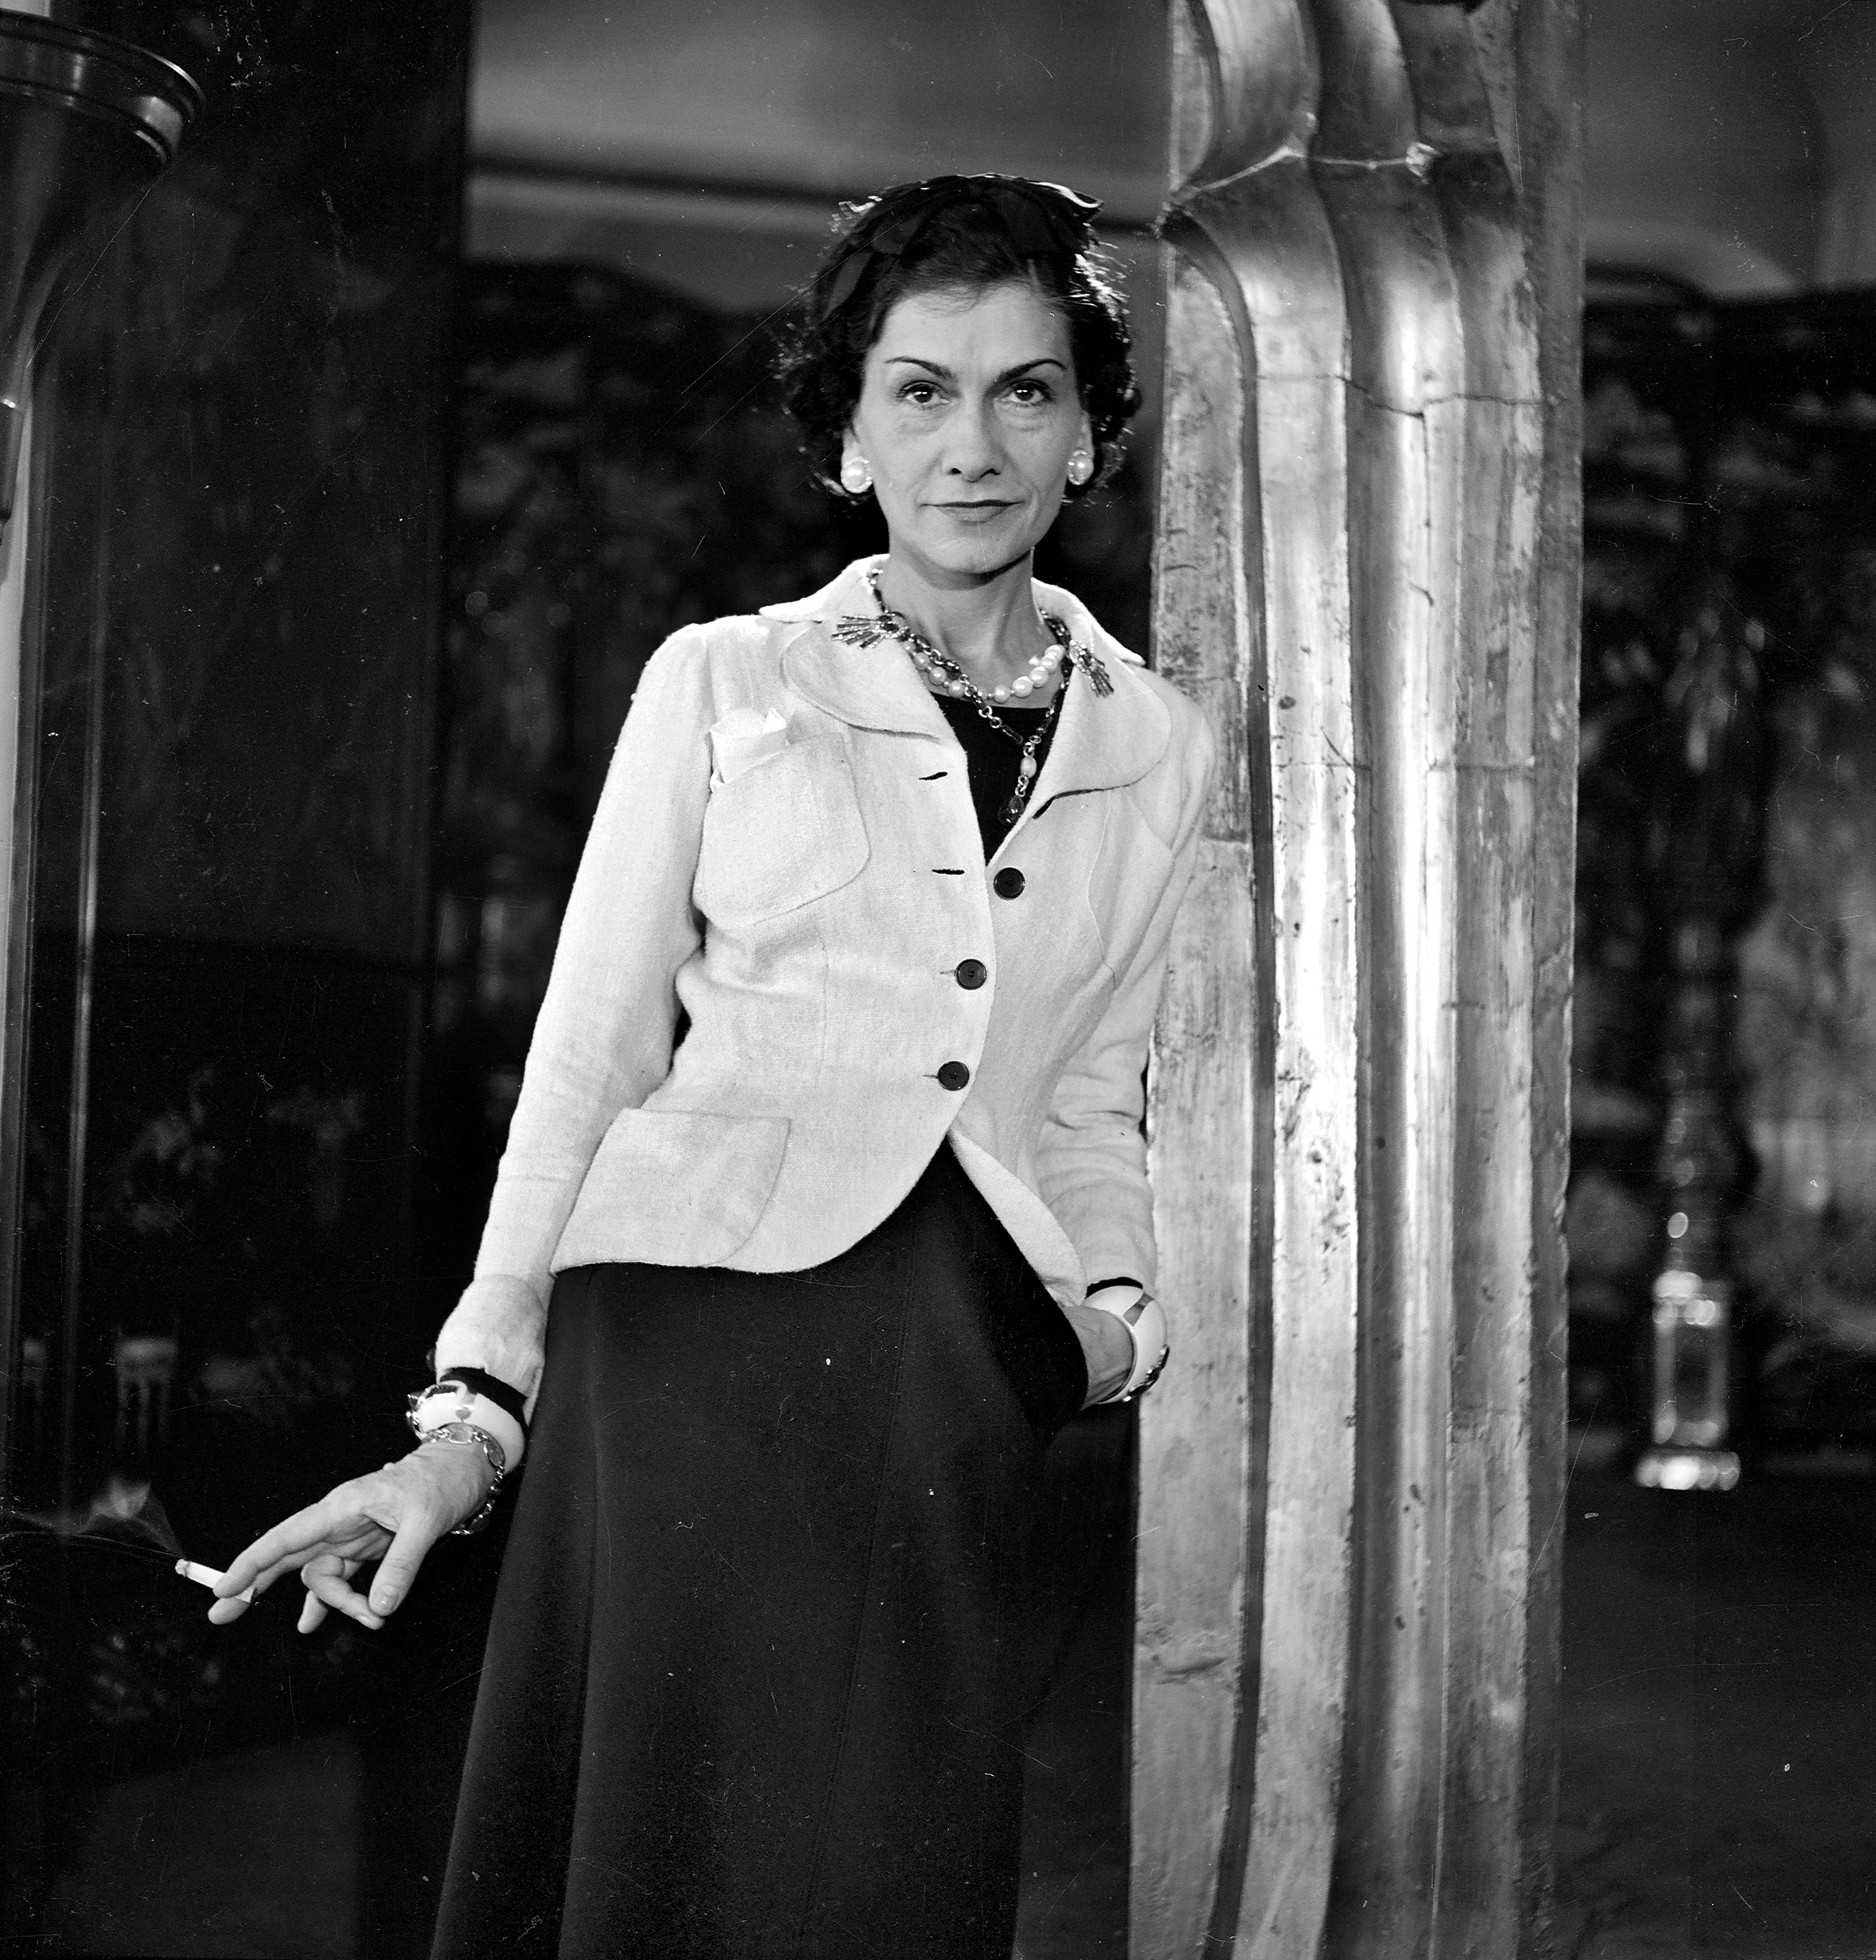 FRANCE - CIRCA 1937:  Coco Chanel, French couturier. Paris, 1937.  (Photo by Lipnitzki/Roger Viollet/Getty Images) (Lipnitzki, Roger Viollet—Getty Images)